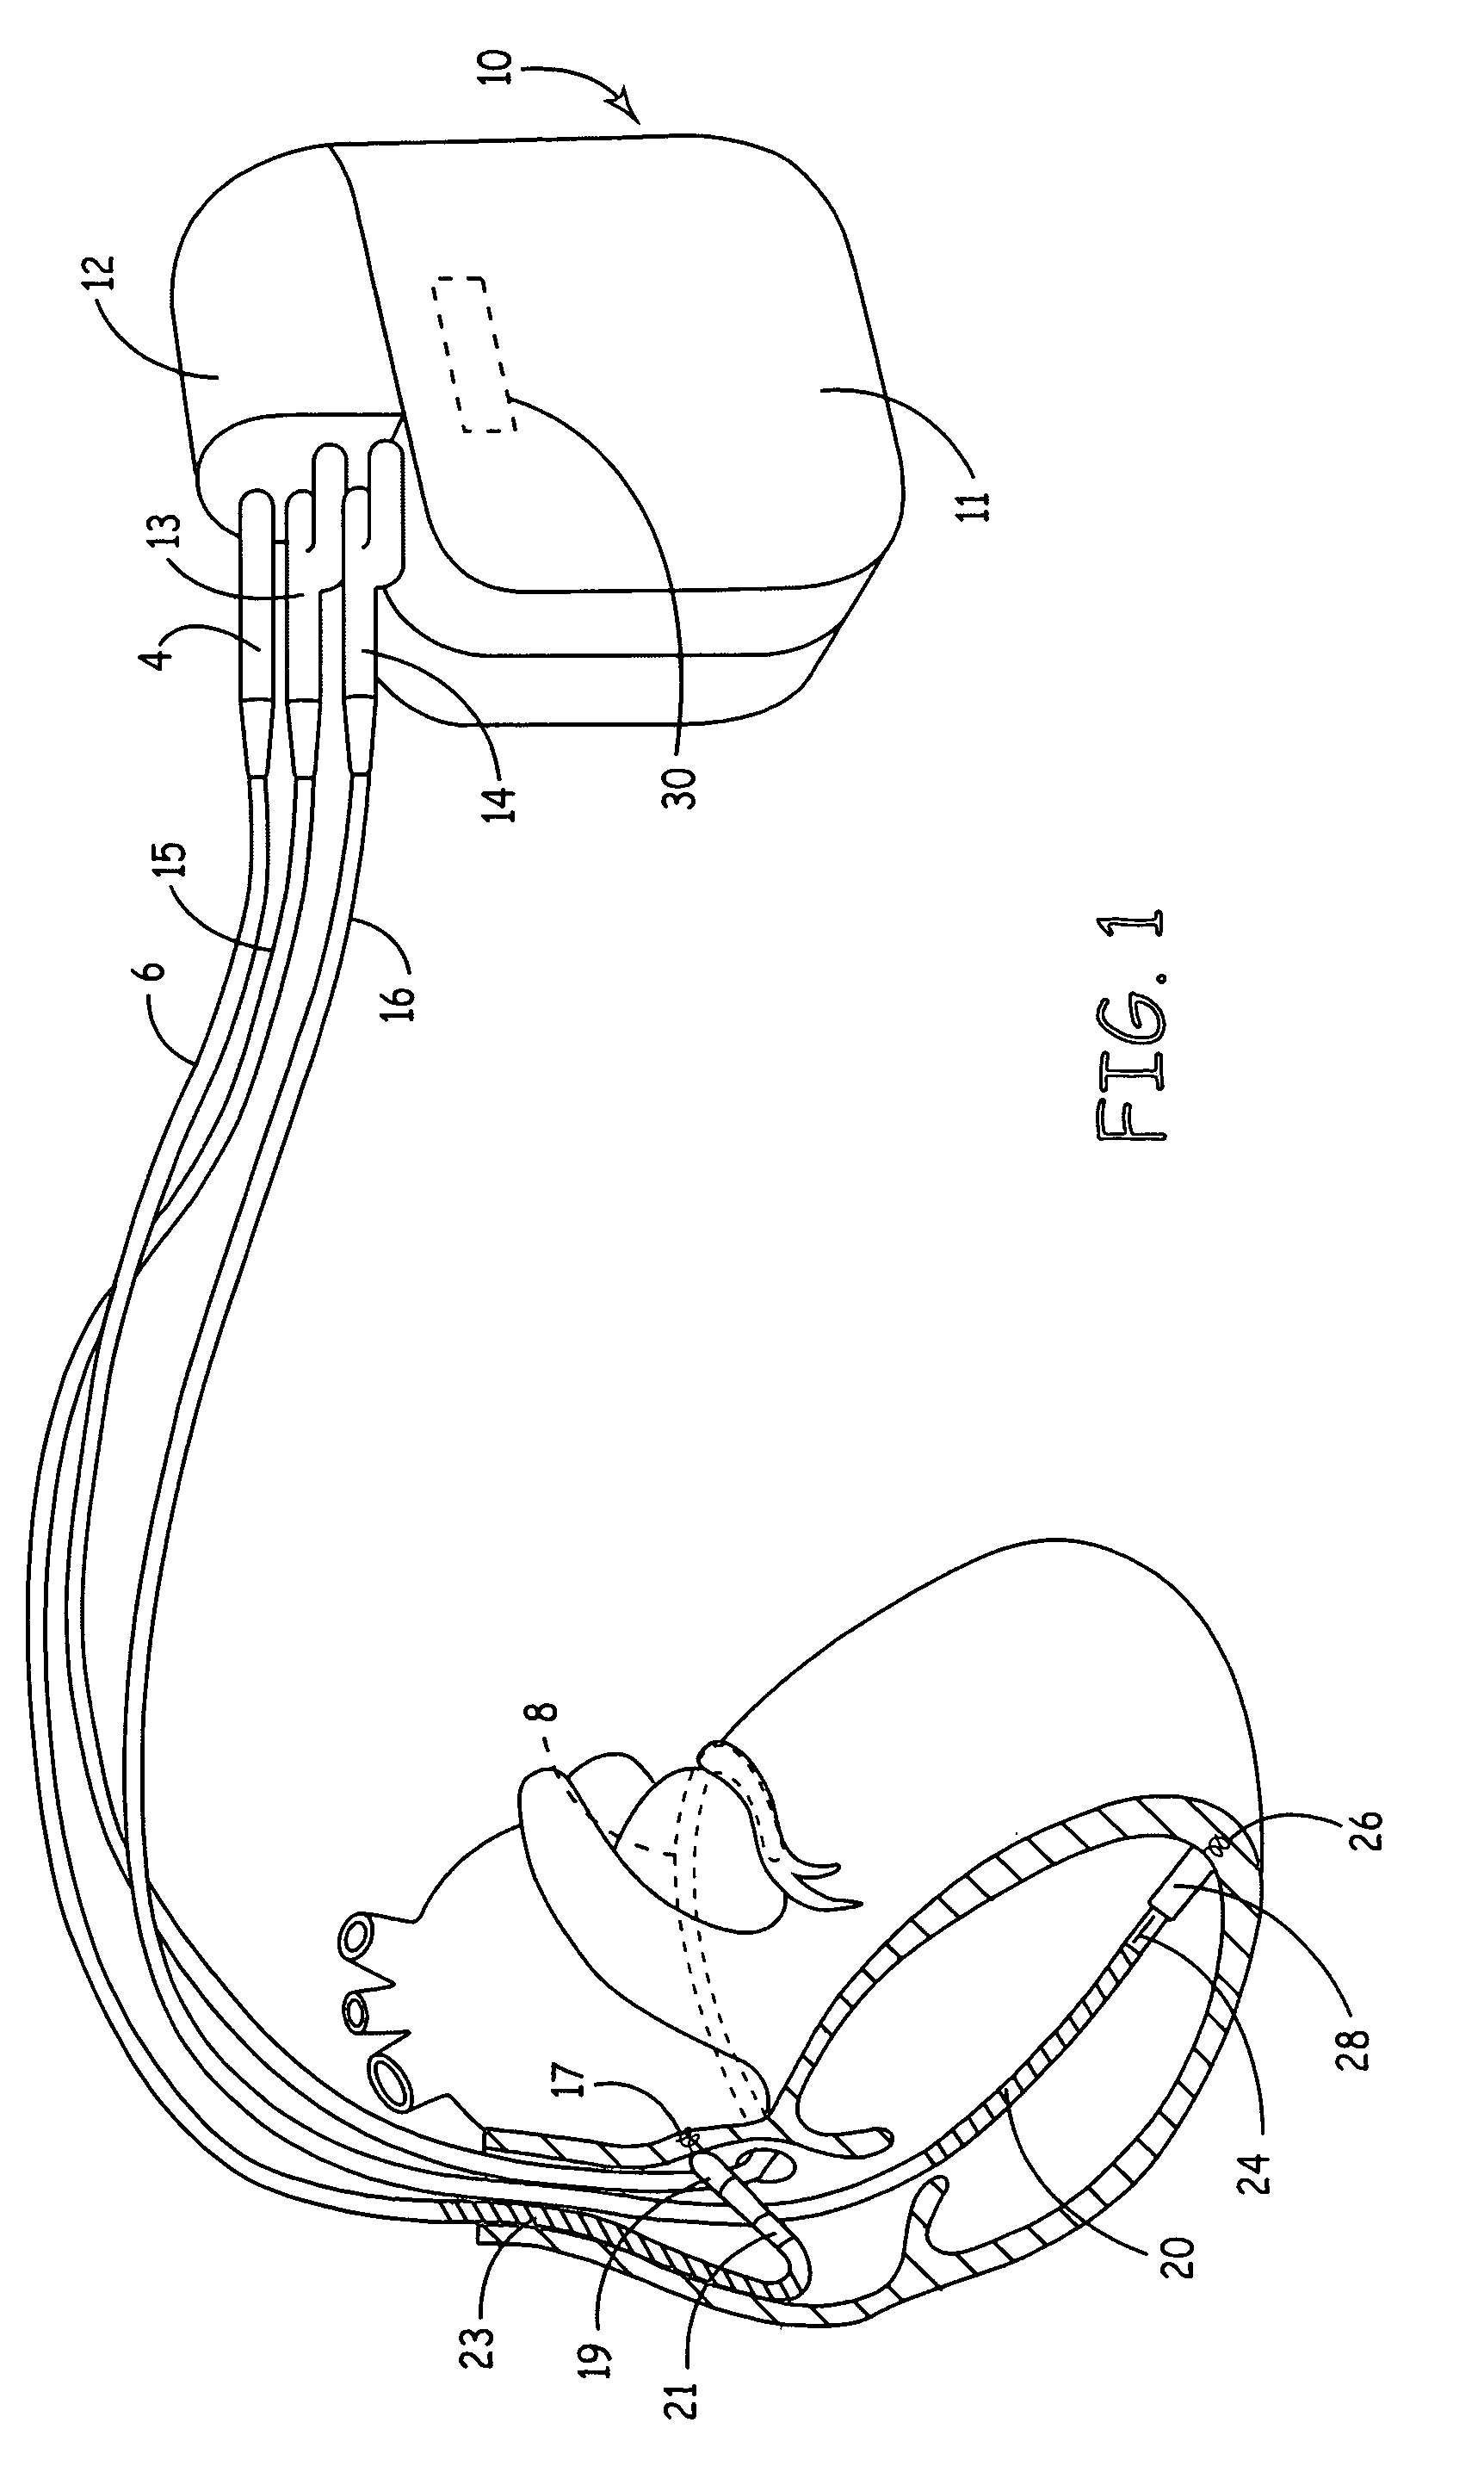 Method and apparatus for identifying lead-related conditions using prediction and detection criteria